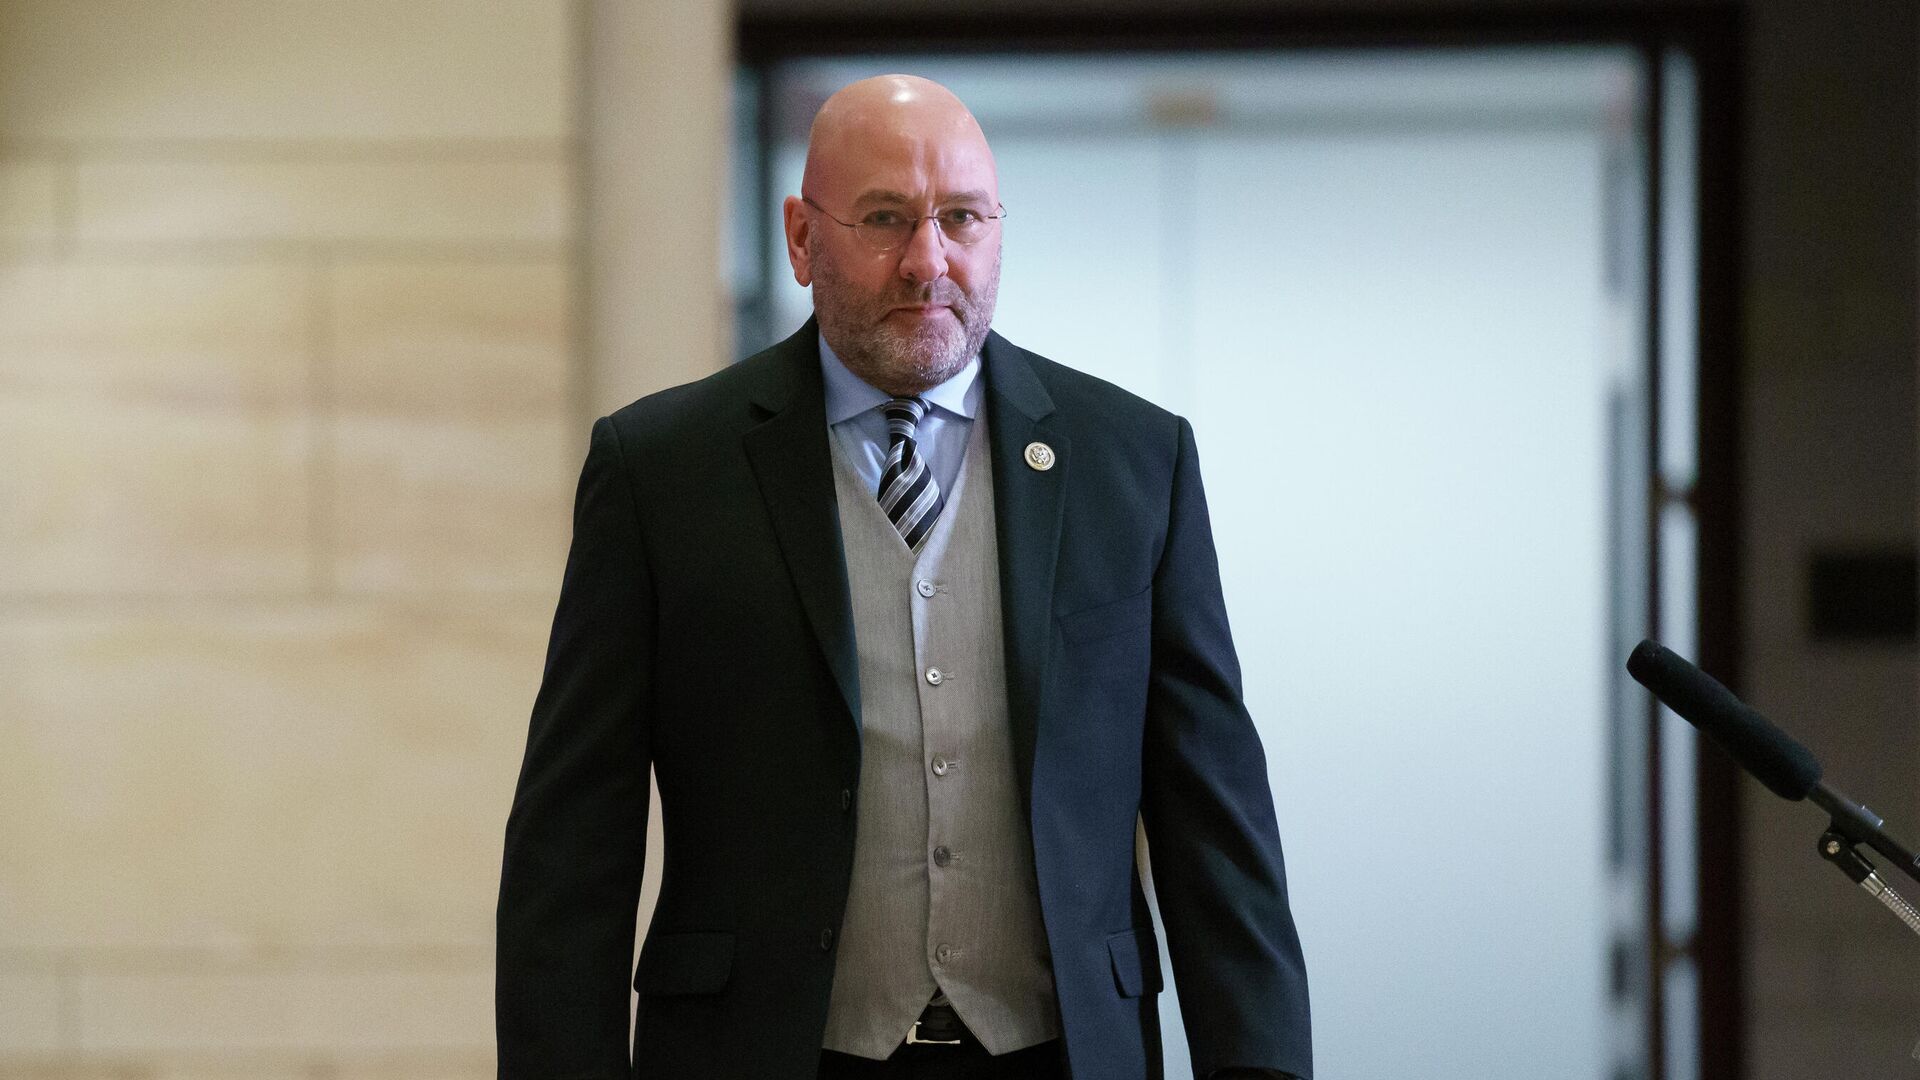 Rep. Clay Higgins, R-La., arrives as the House Republican Conference meets to elect a new chair, at the Capitol in Washington, Friday, May 14, 2021. - Sputnik International, 1920, 28.02.2022